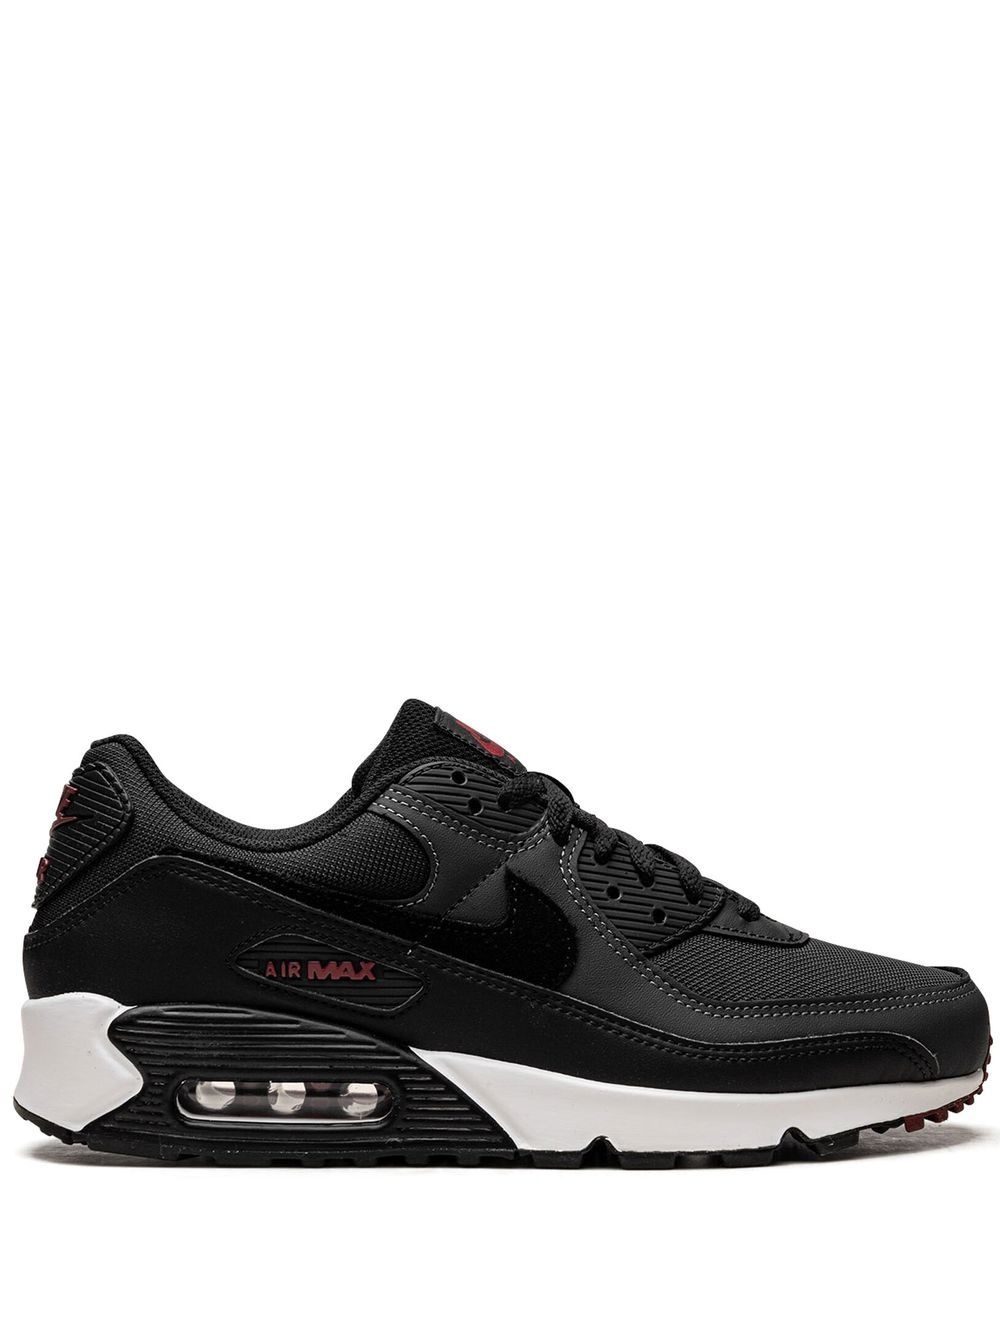 Air Max 90 "Anthracite Team Red" sneakers - 1